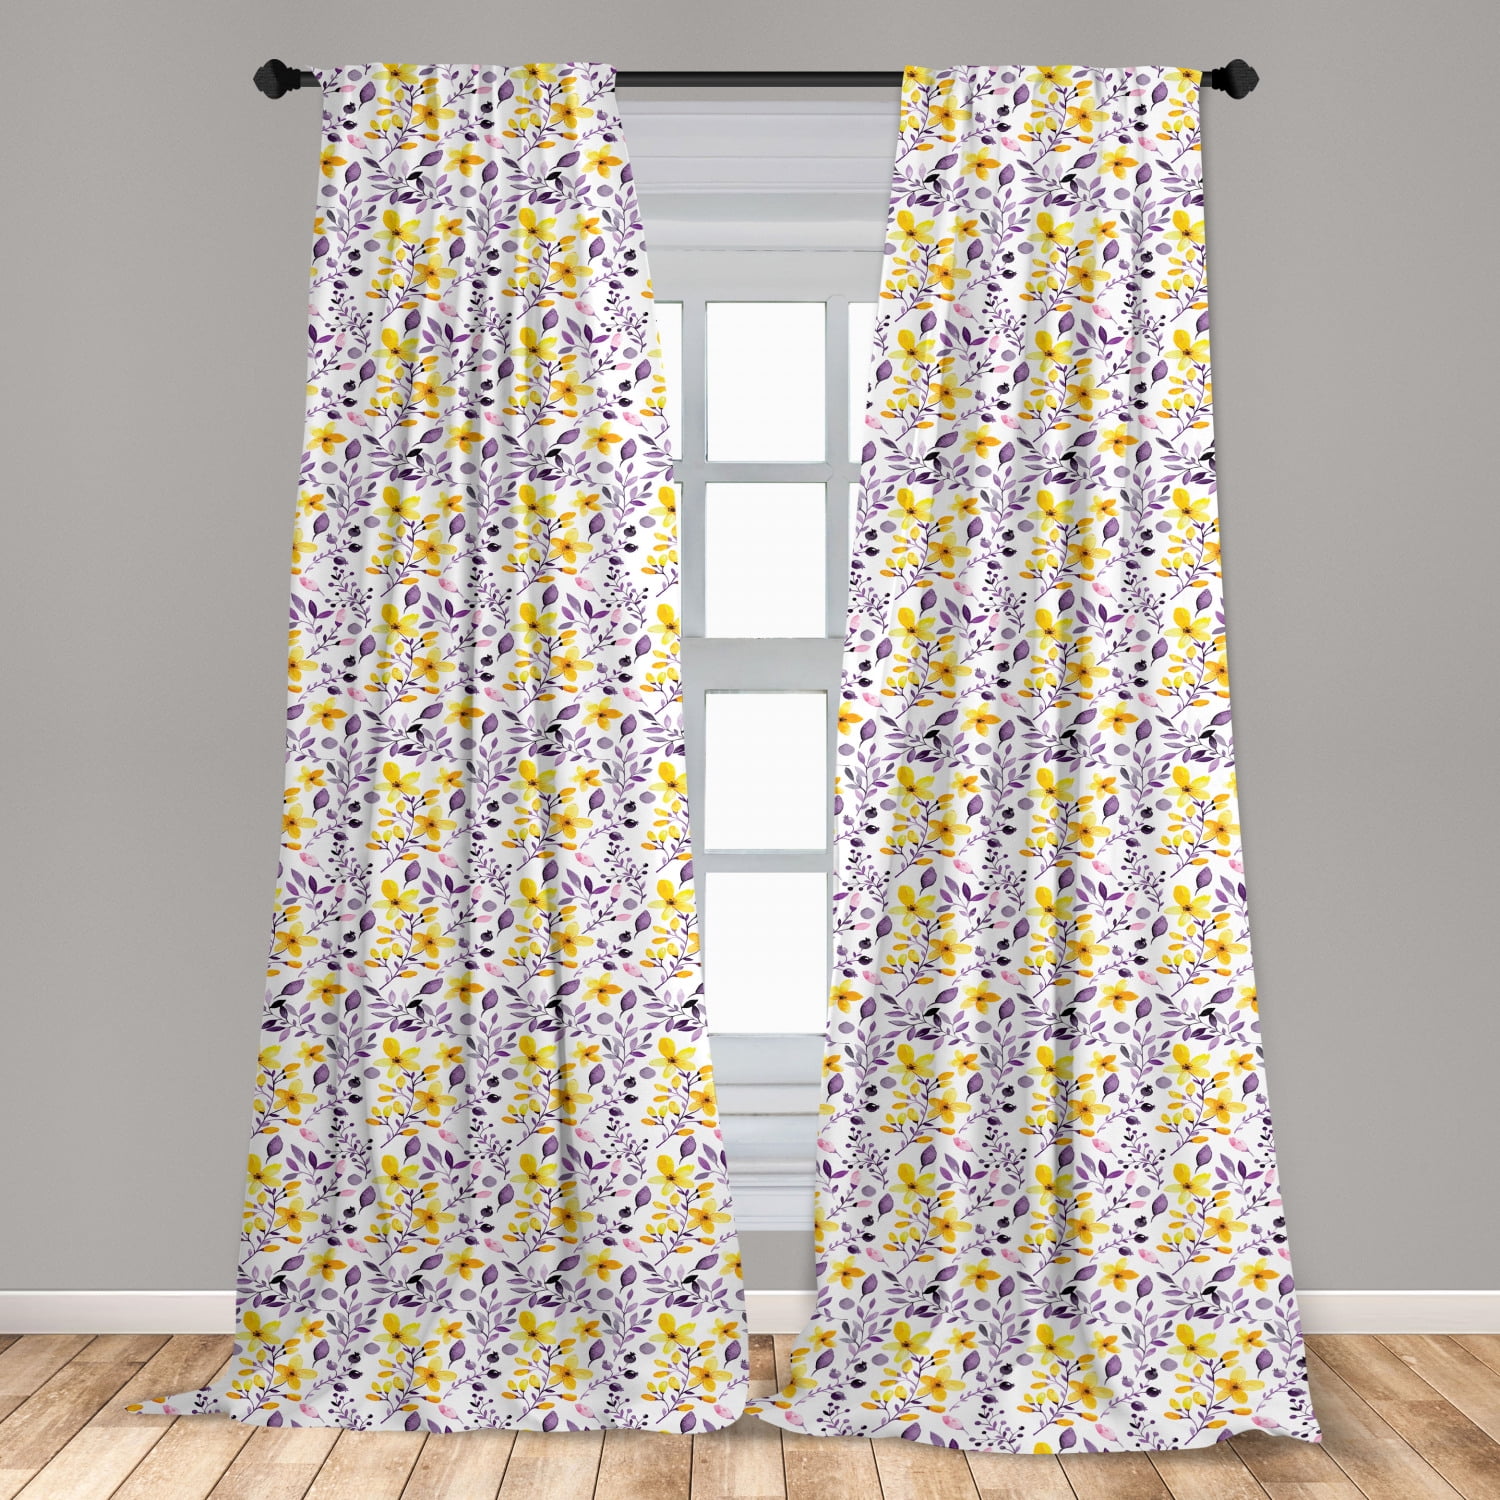 to measure Curtain Printed Photo Curtain "Orchid" Curtain with Motif Digital Printing 